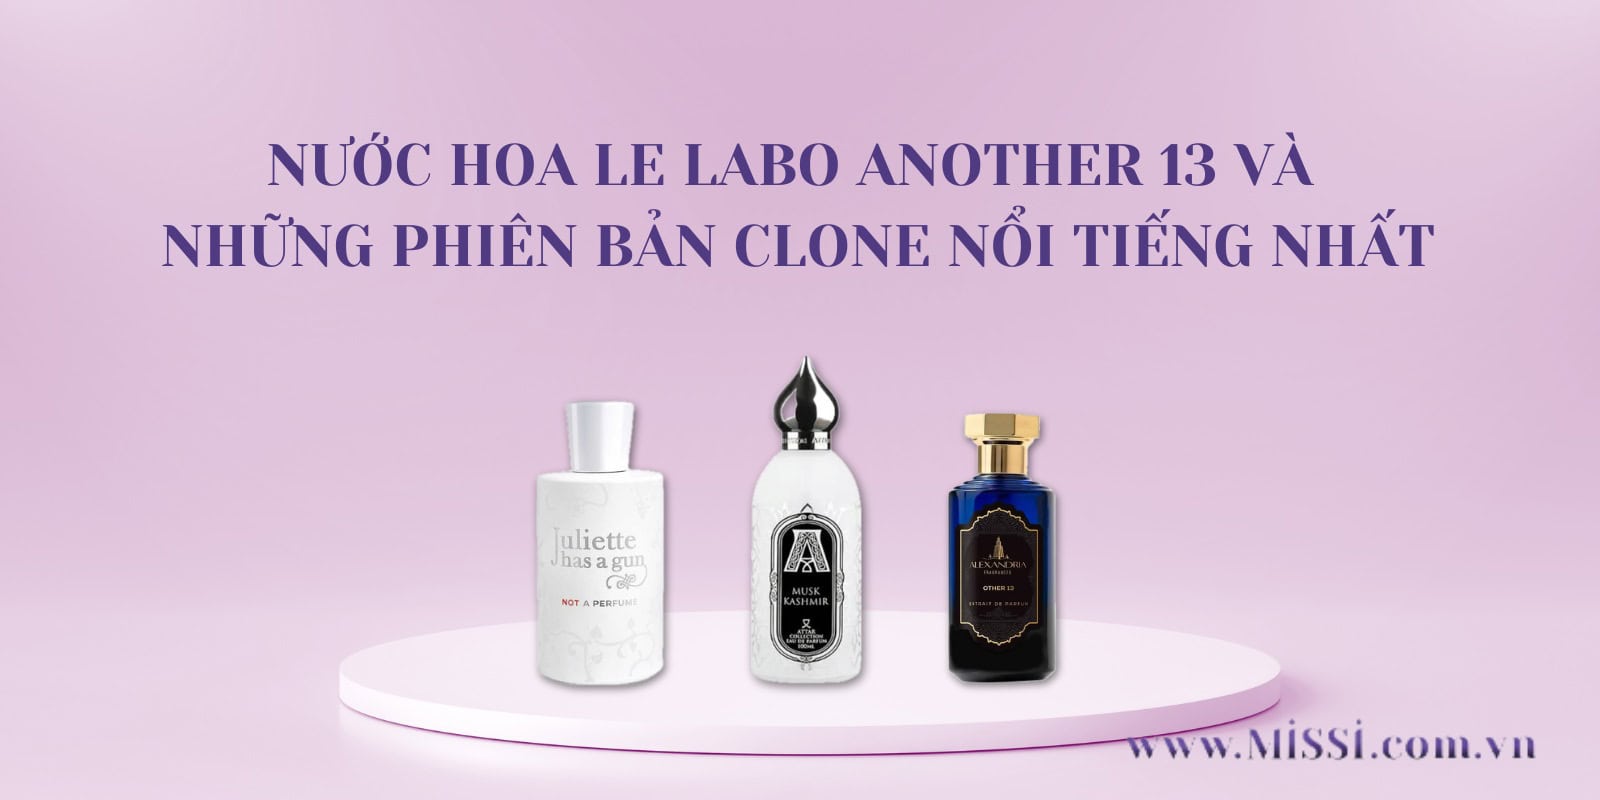 Anh dai dien Nuoc hoa Le Labo Another 13 va nhung phien ban Clone noi tieng nhat